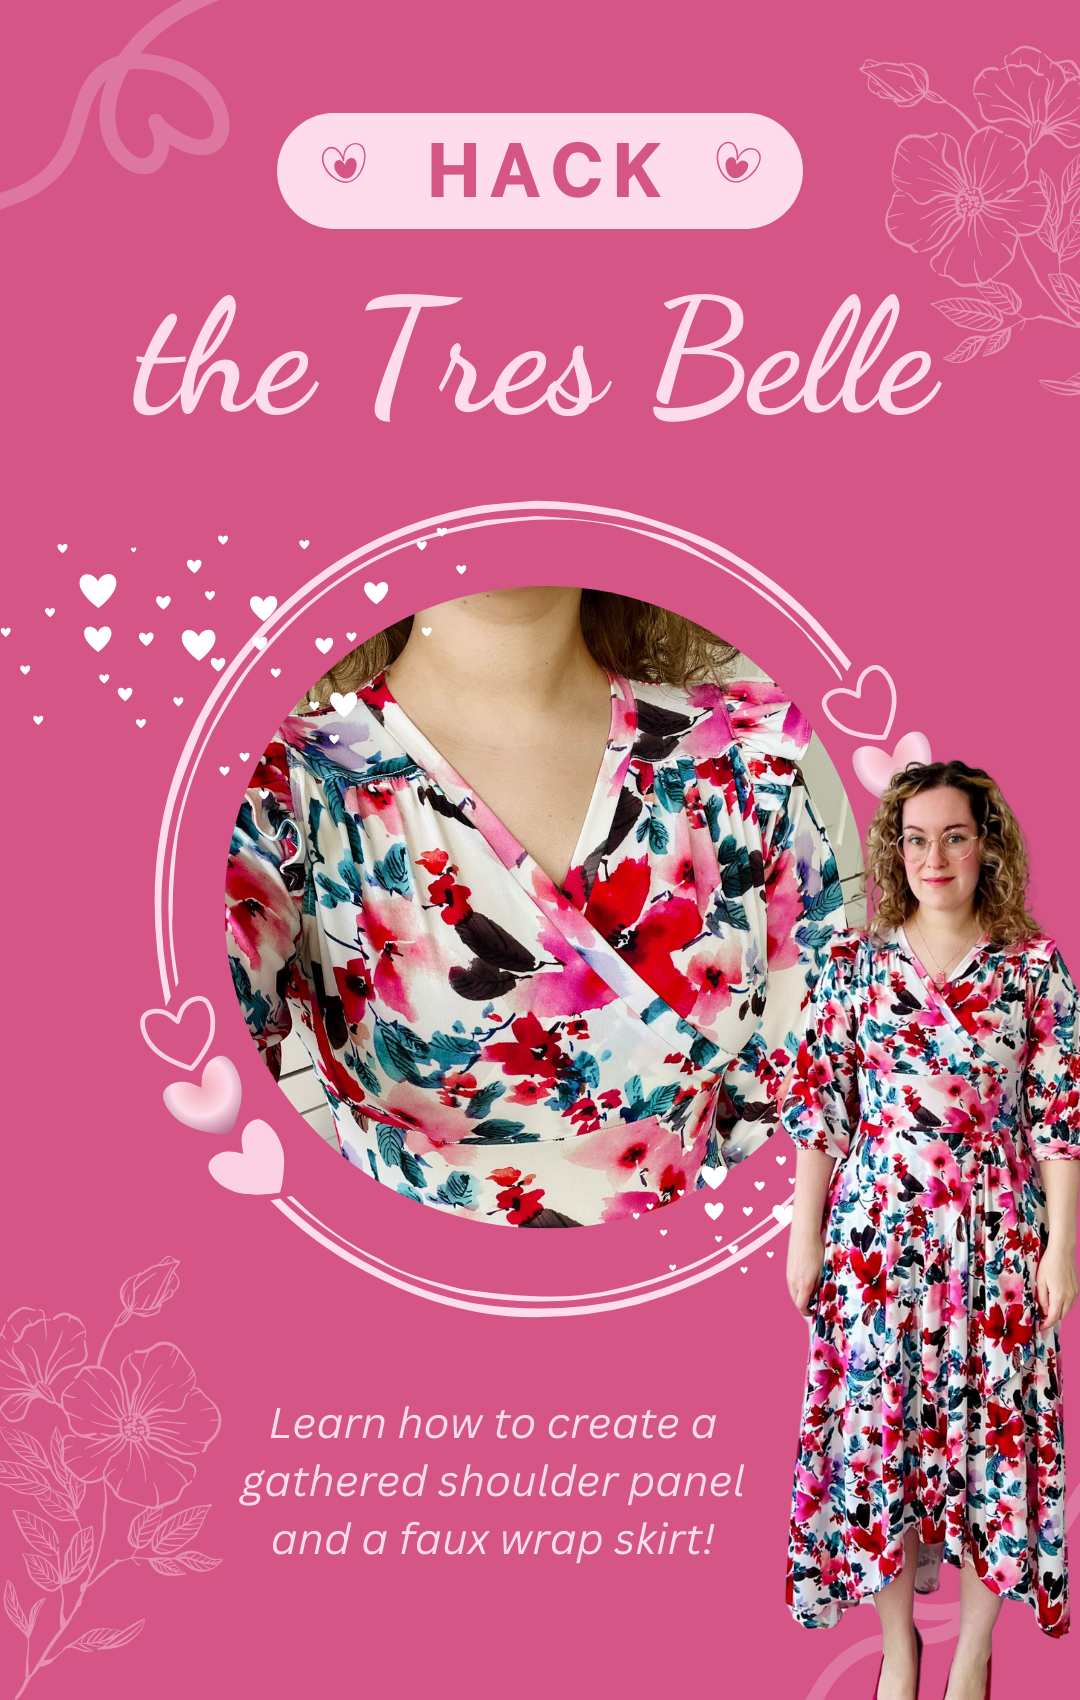 The Tres Belle Dress Hack Blog: How to Create Gathered Shoulder Panels & Faux Wrap Skirt